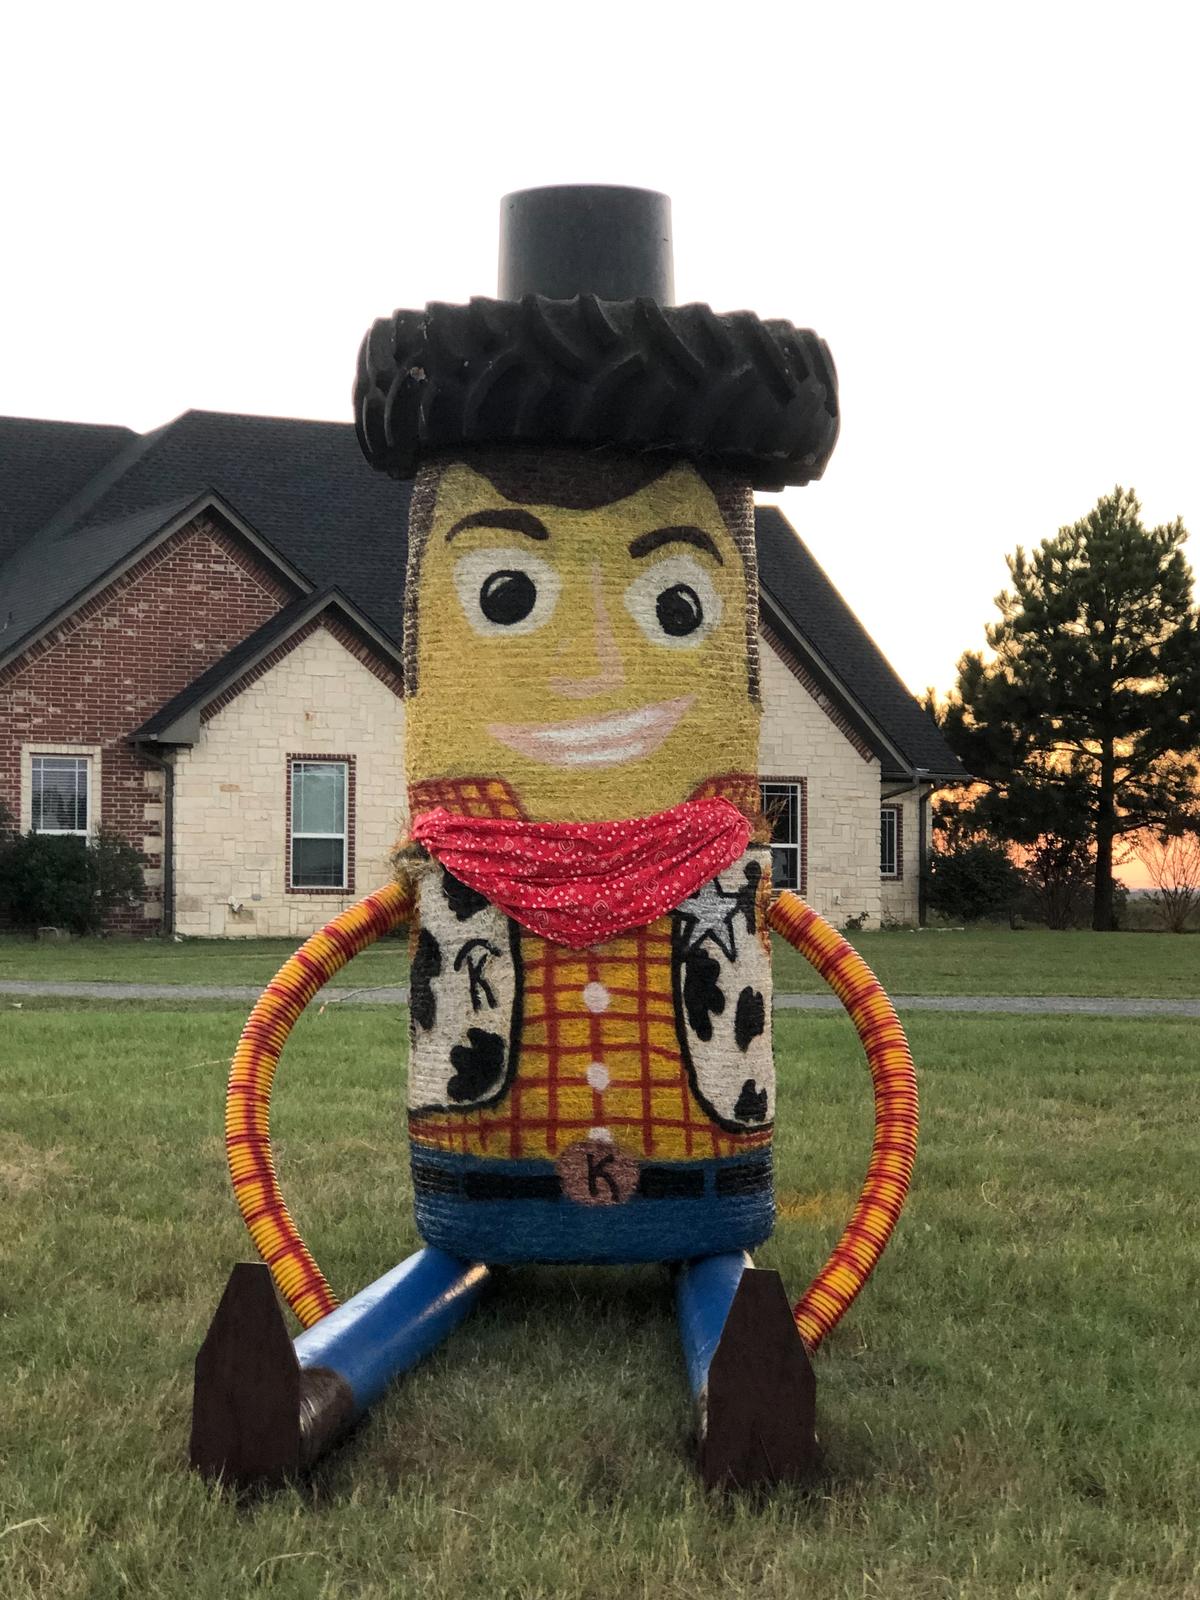 A hay bale sculpture of "Woody," from Toy Story. (Courtesy of <a href="https://www.facebook.com/groups/320200669469831/">Melissa Kelley</a>)